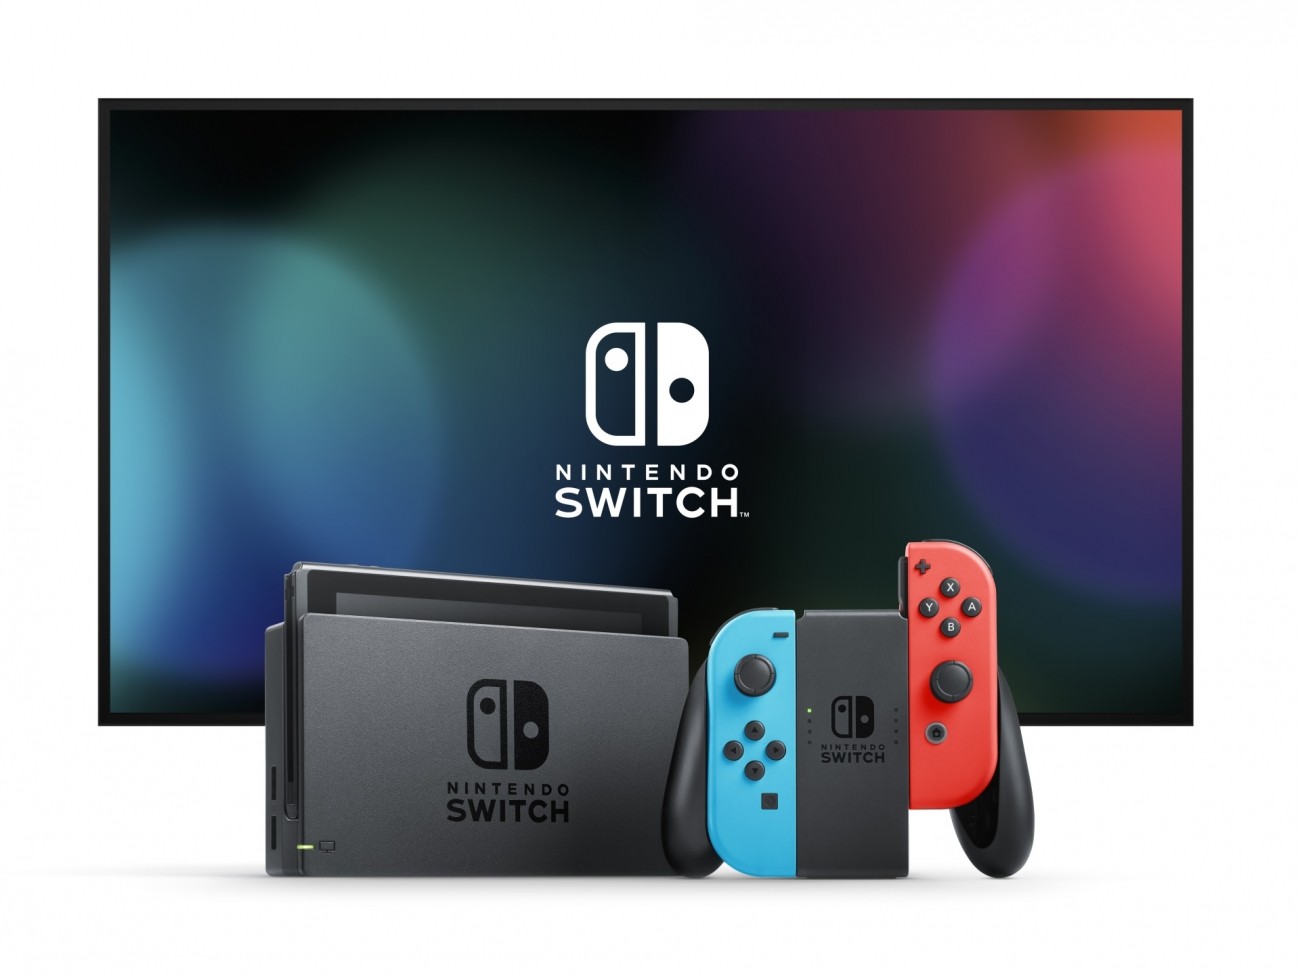 Devs can 'easily' port PC games to Nintendo Switch